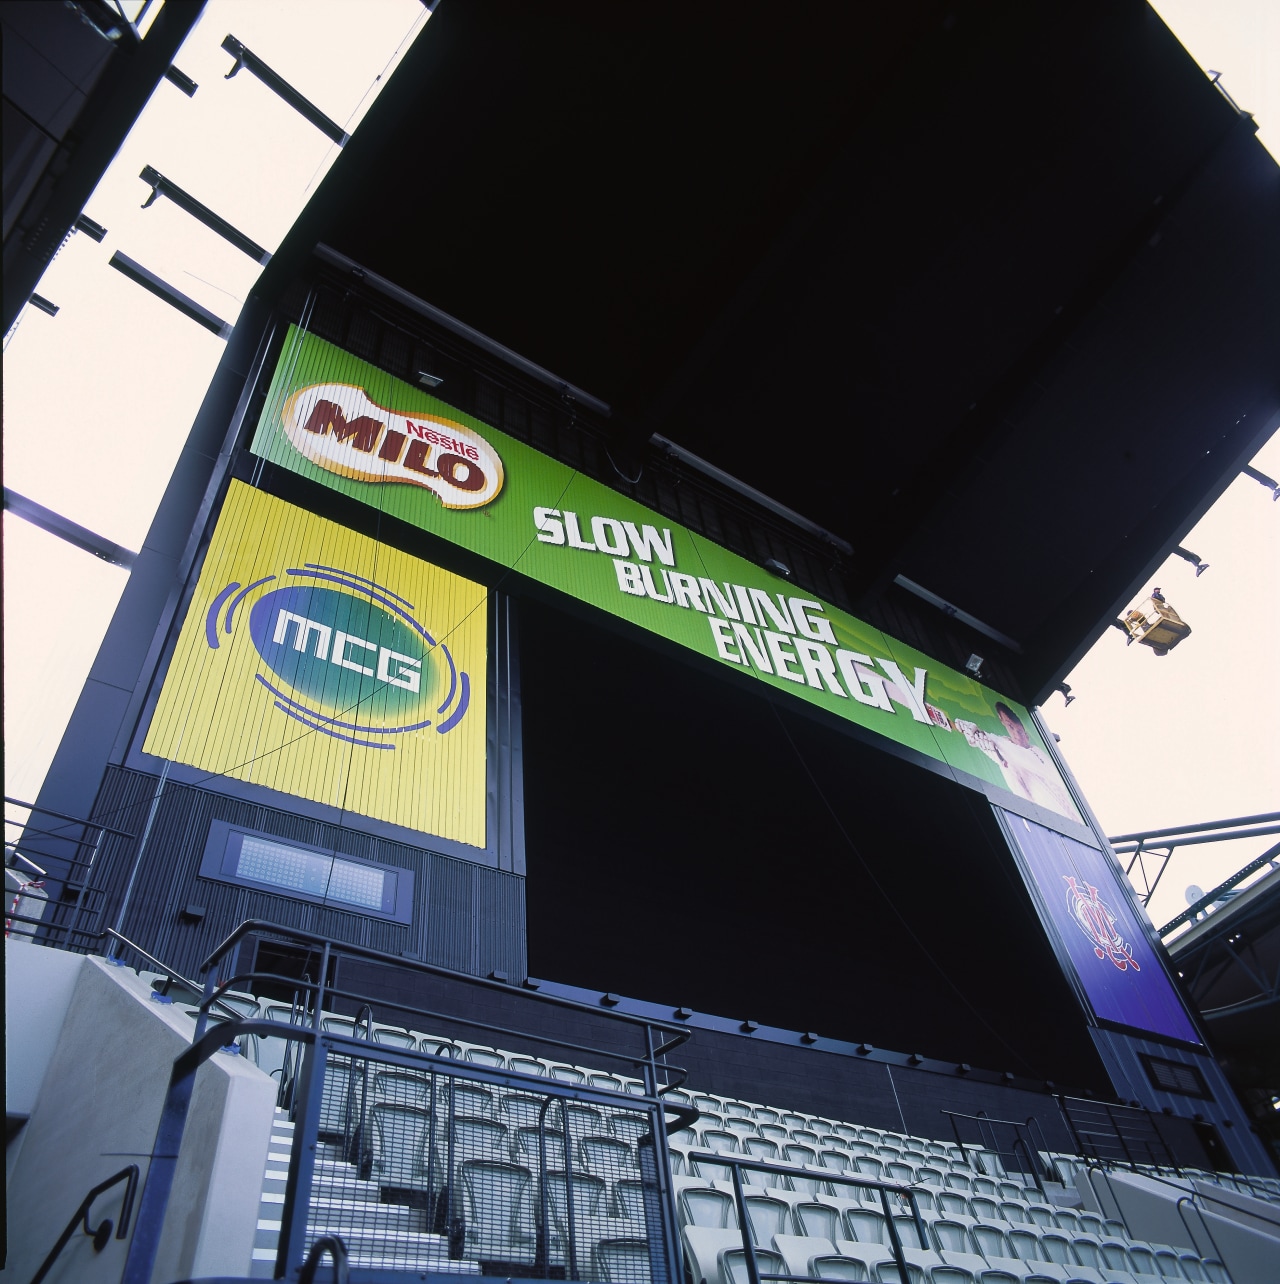 View of large screen and advertising at sports advertising, building, car, sport venue, structure, technology, black